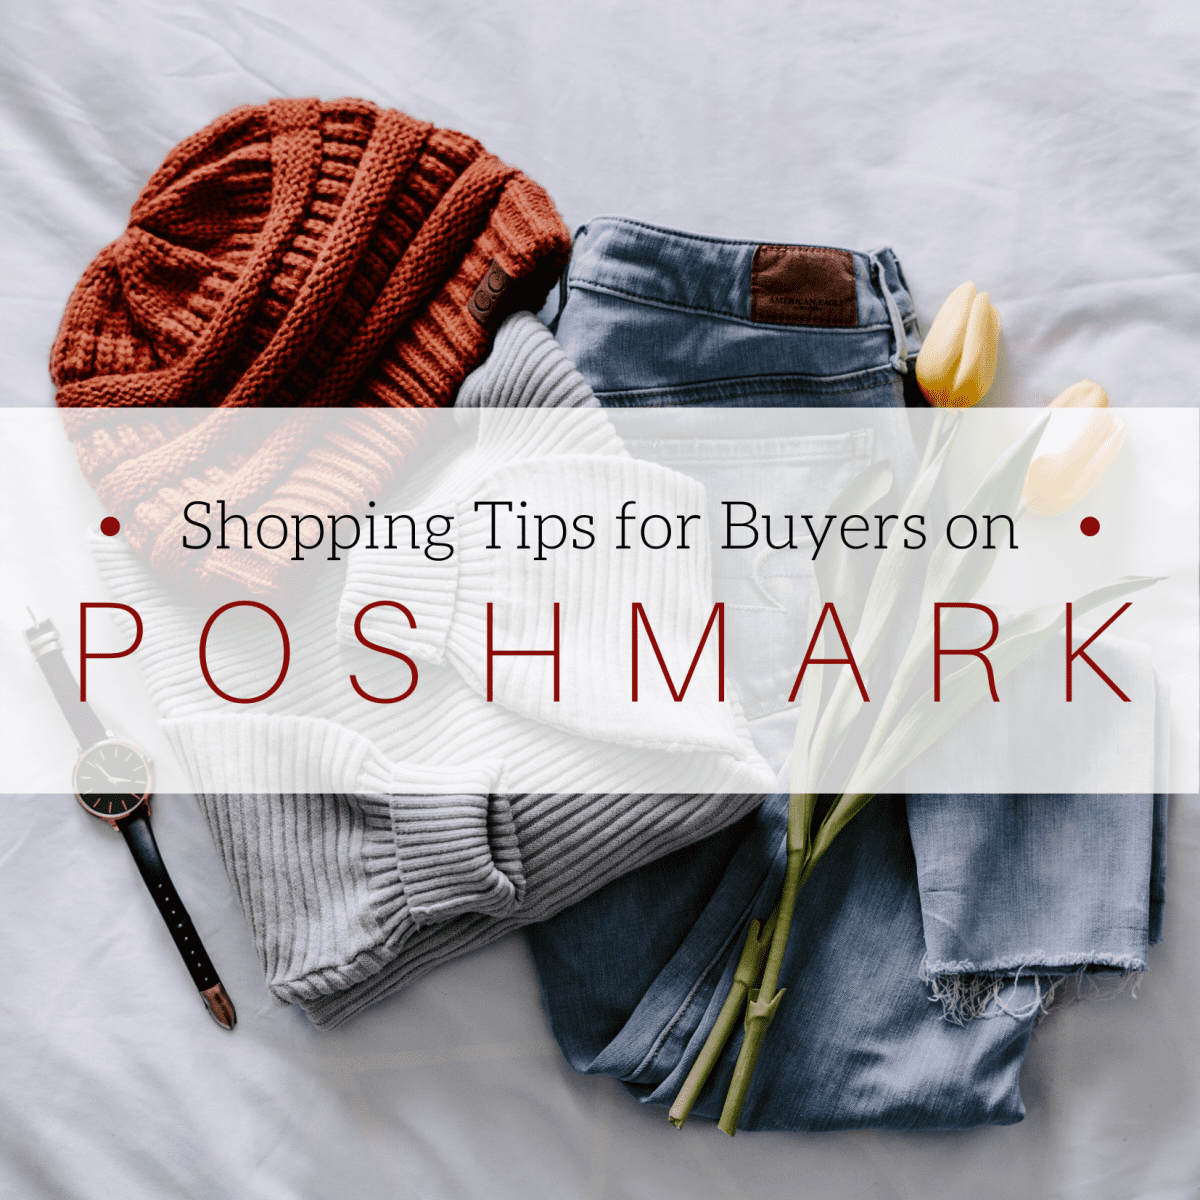 Poshmark Review: What You Should Know Before Buying or Selling